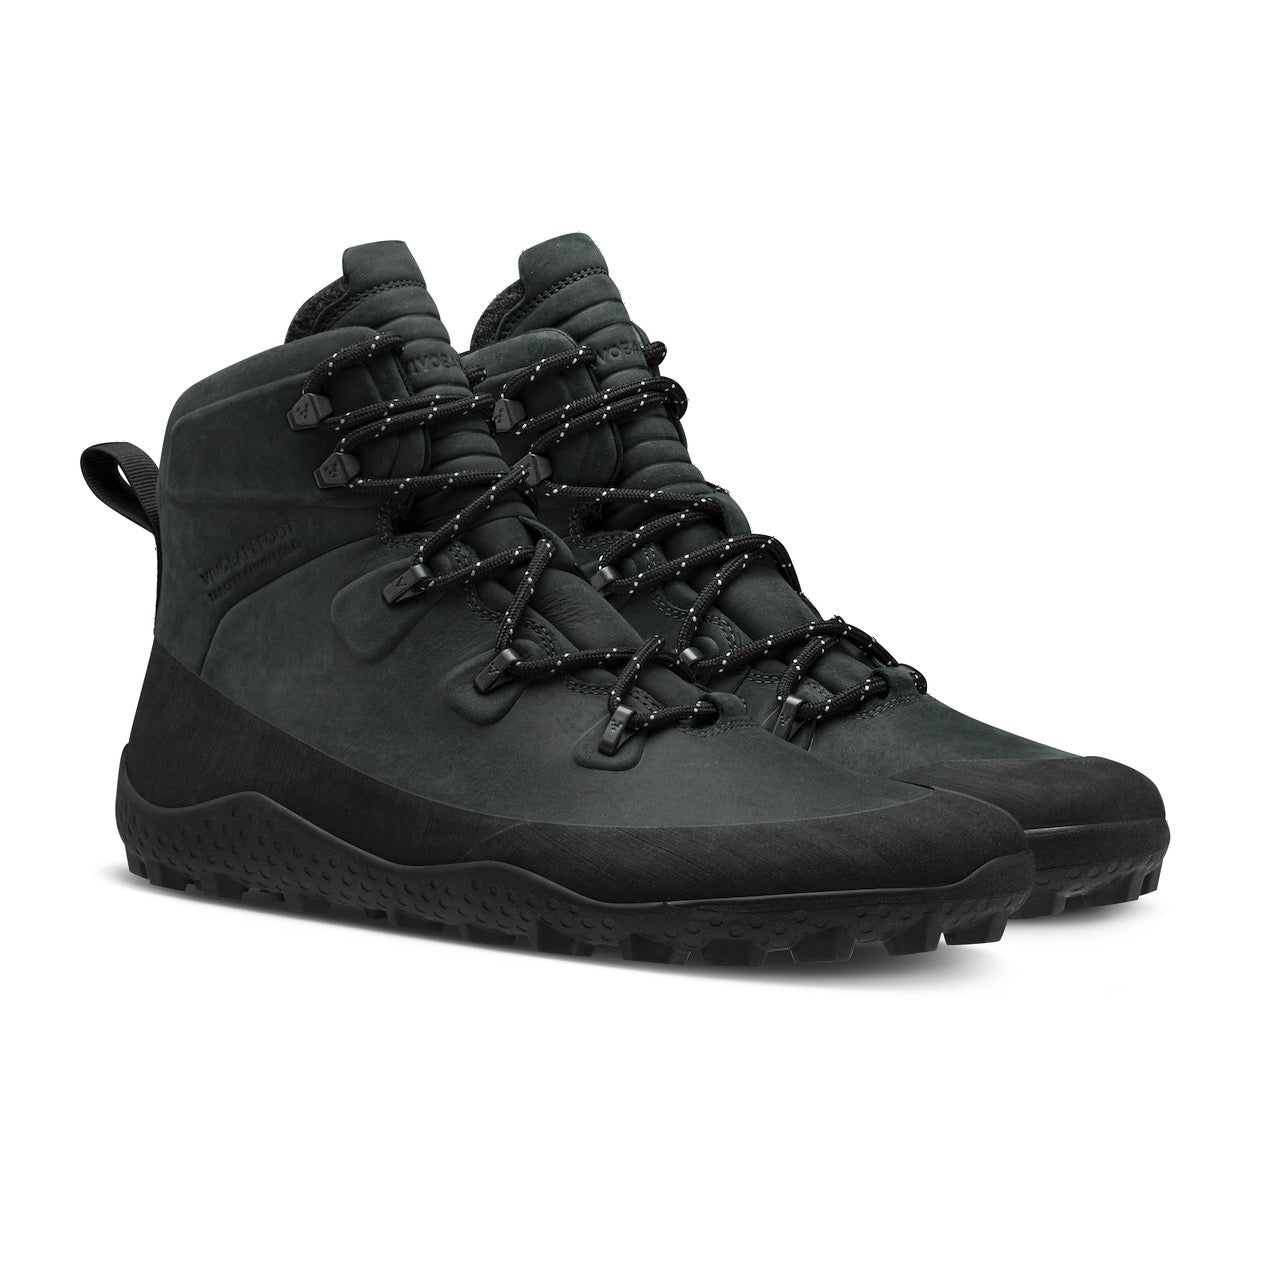 Vivobarefoot Tracker All Weather SG. Men's (obsidian) – The Foot